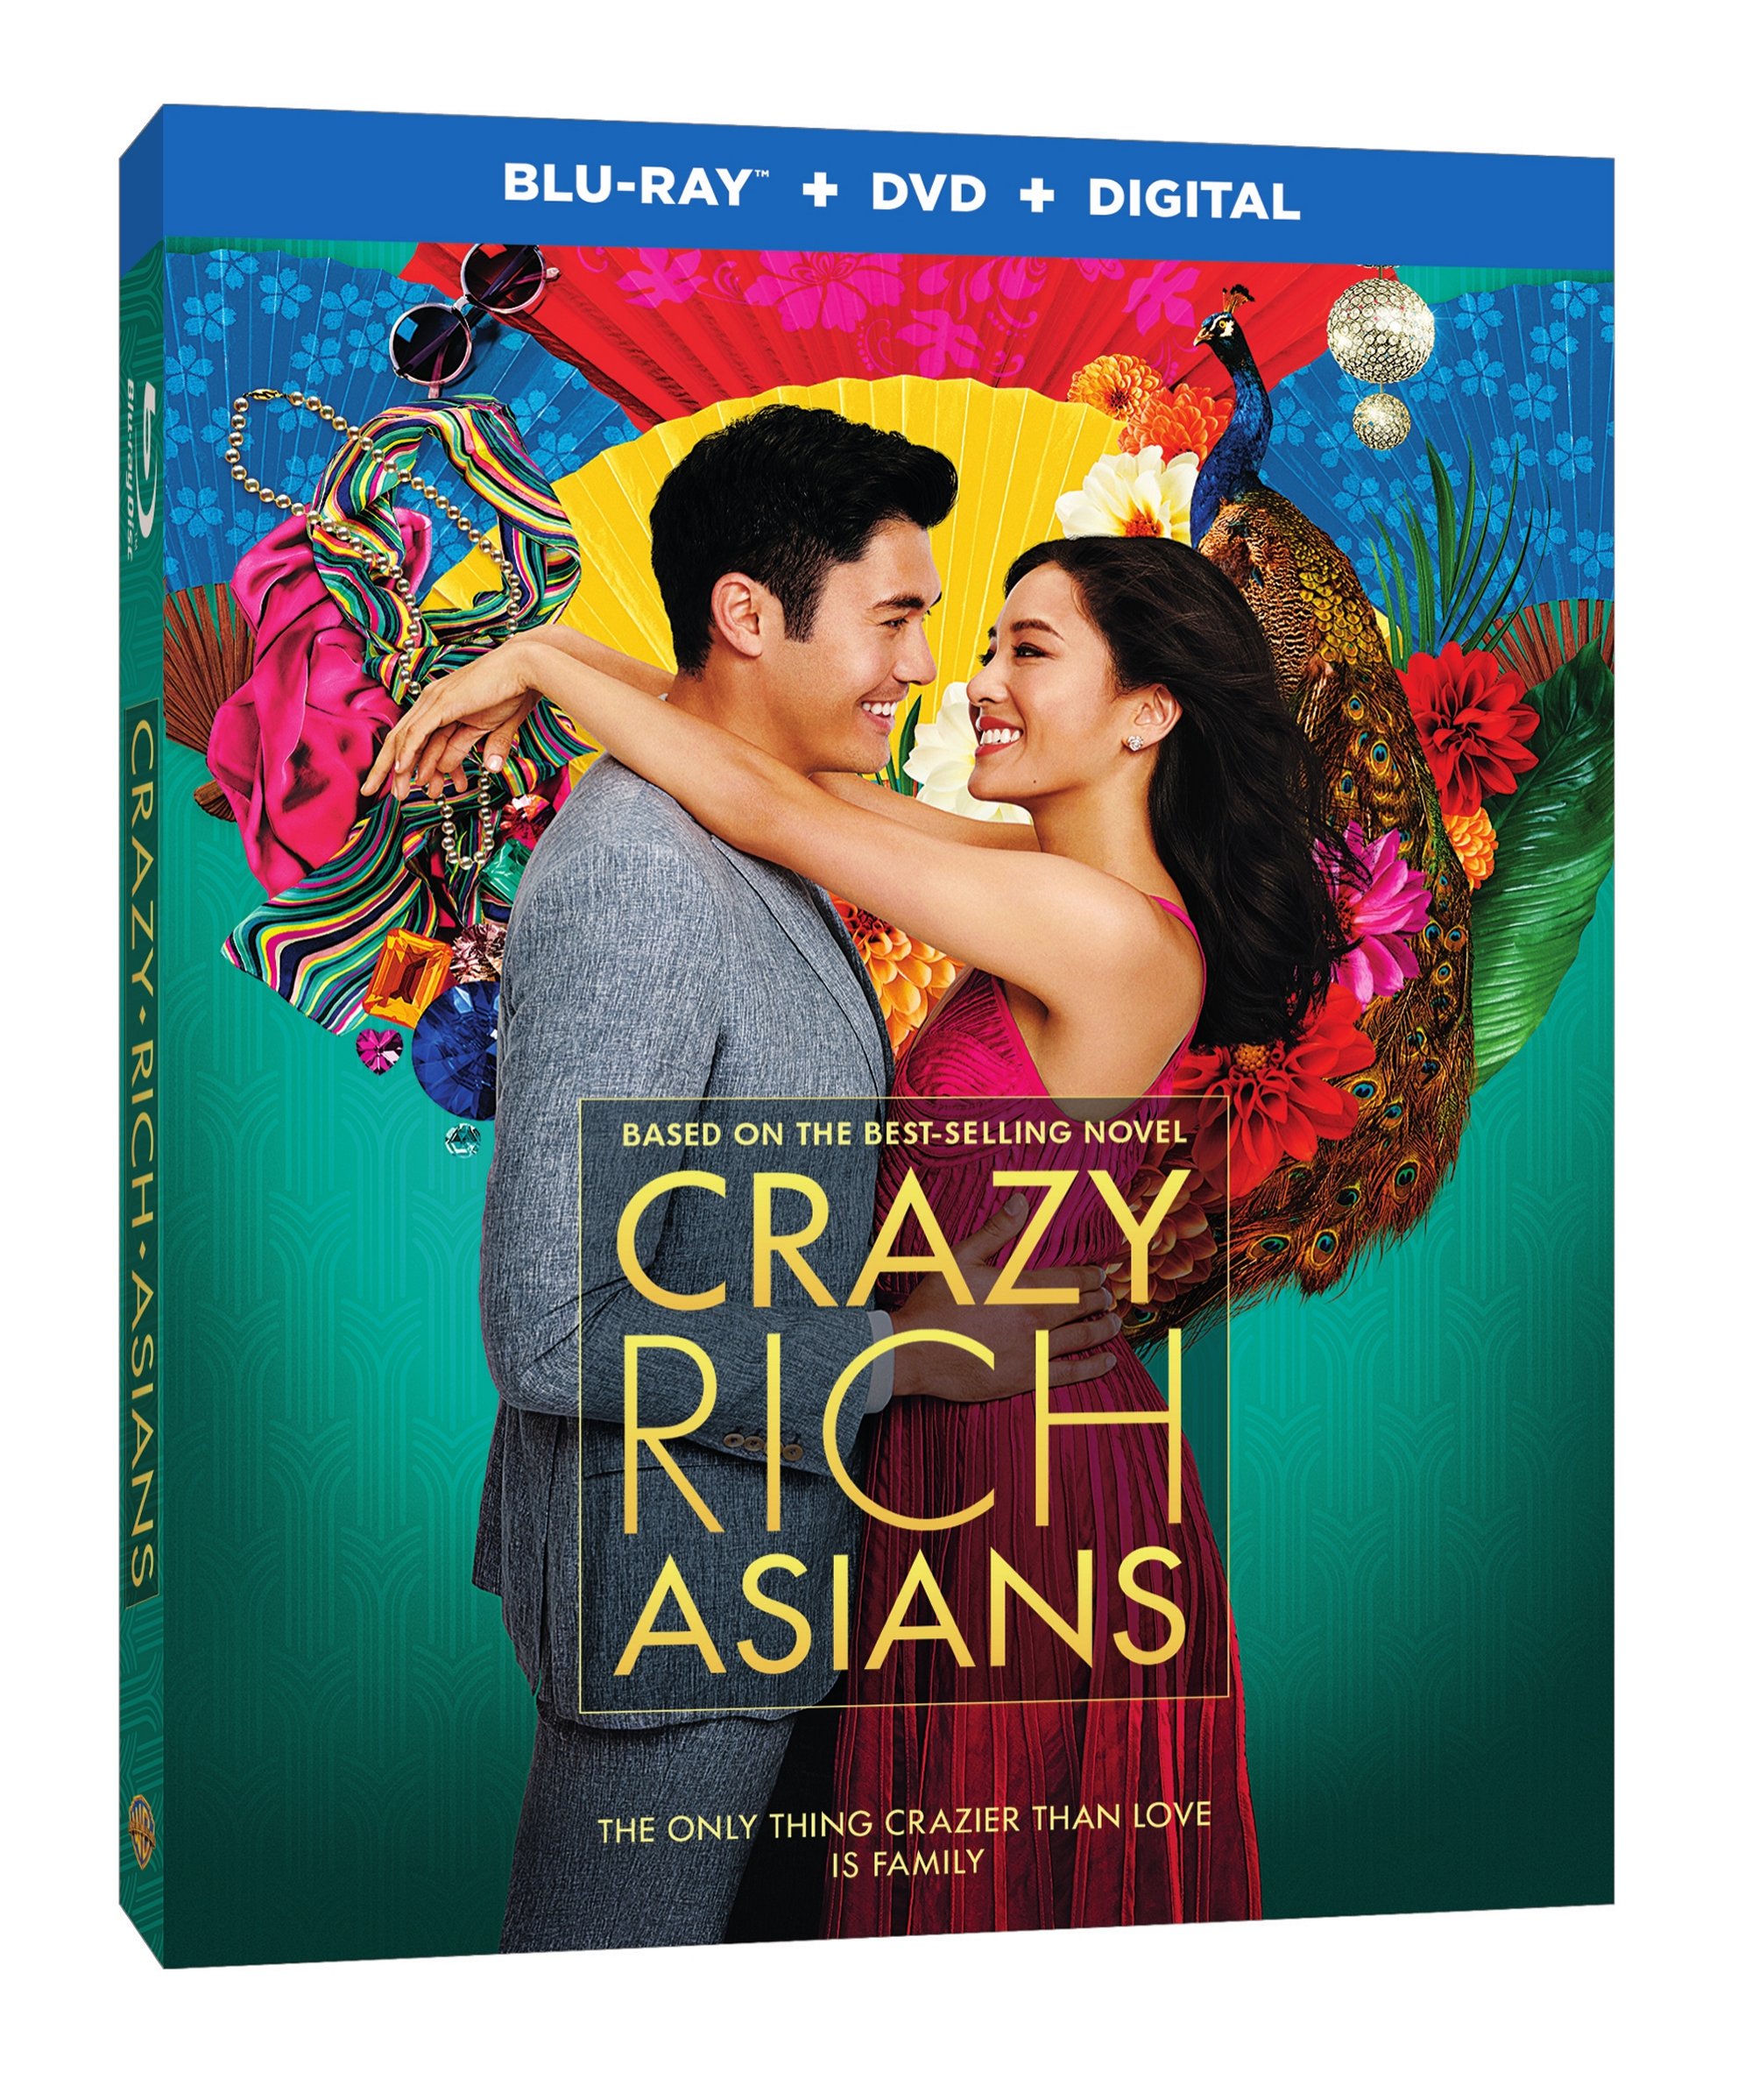 Crazy Rich Asians Blu-Ray Combo pack cover (Warner Bros. Home Entertainment)